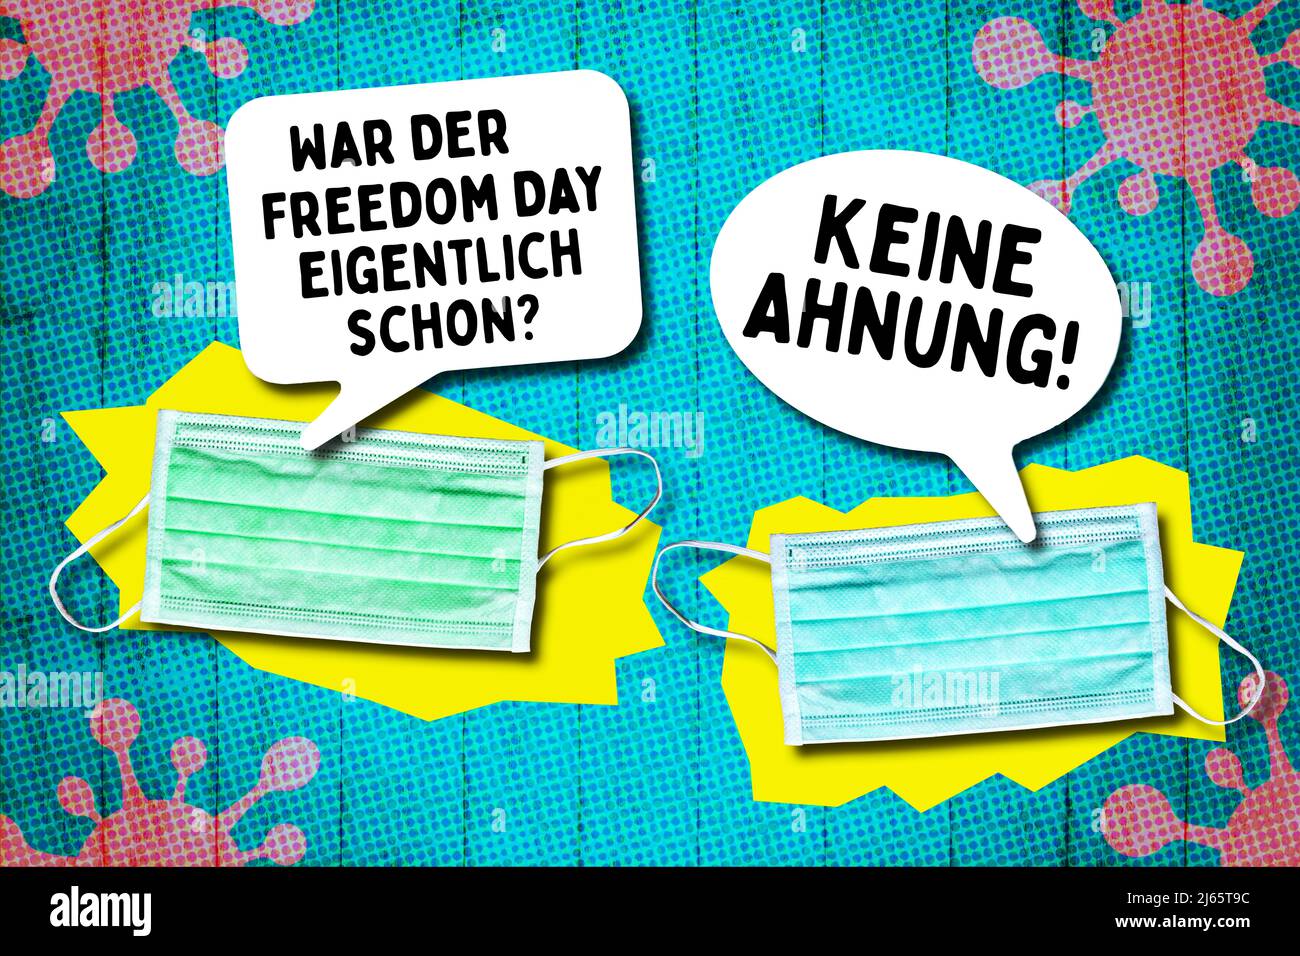 Face Masks With Speech Bubbles, Freedom Day, Symbolic Image Stock Photo